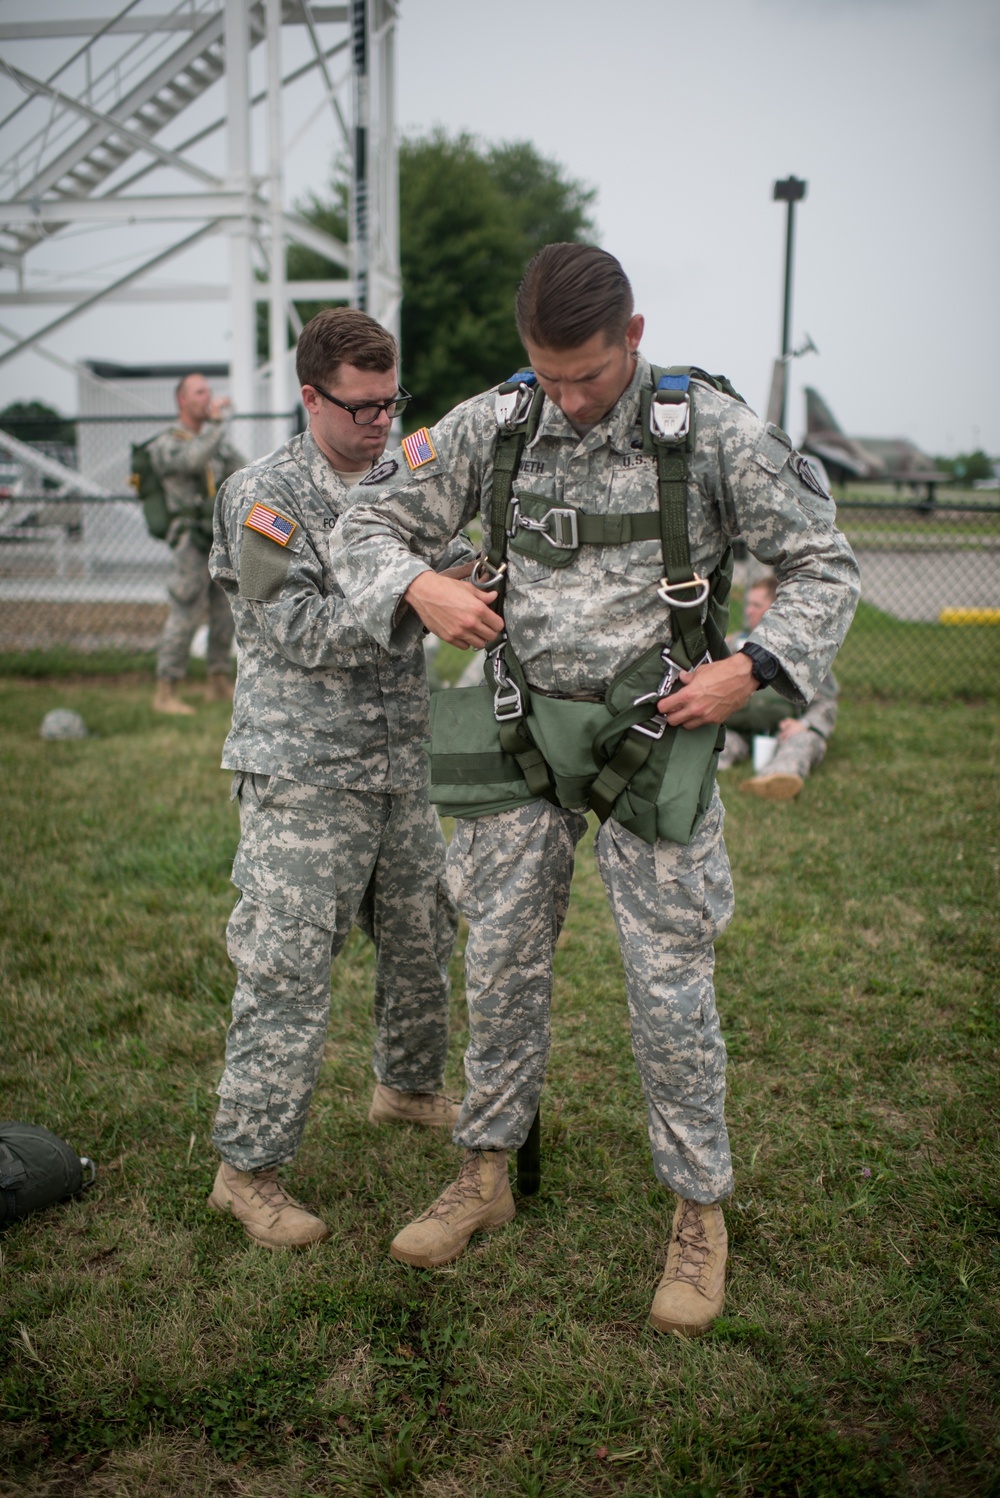 Operation Tecumseh Rage: Cav Soldiers gain experience in multiservice training exercise